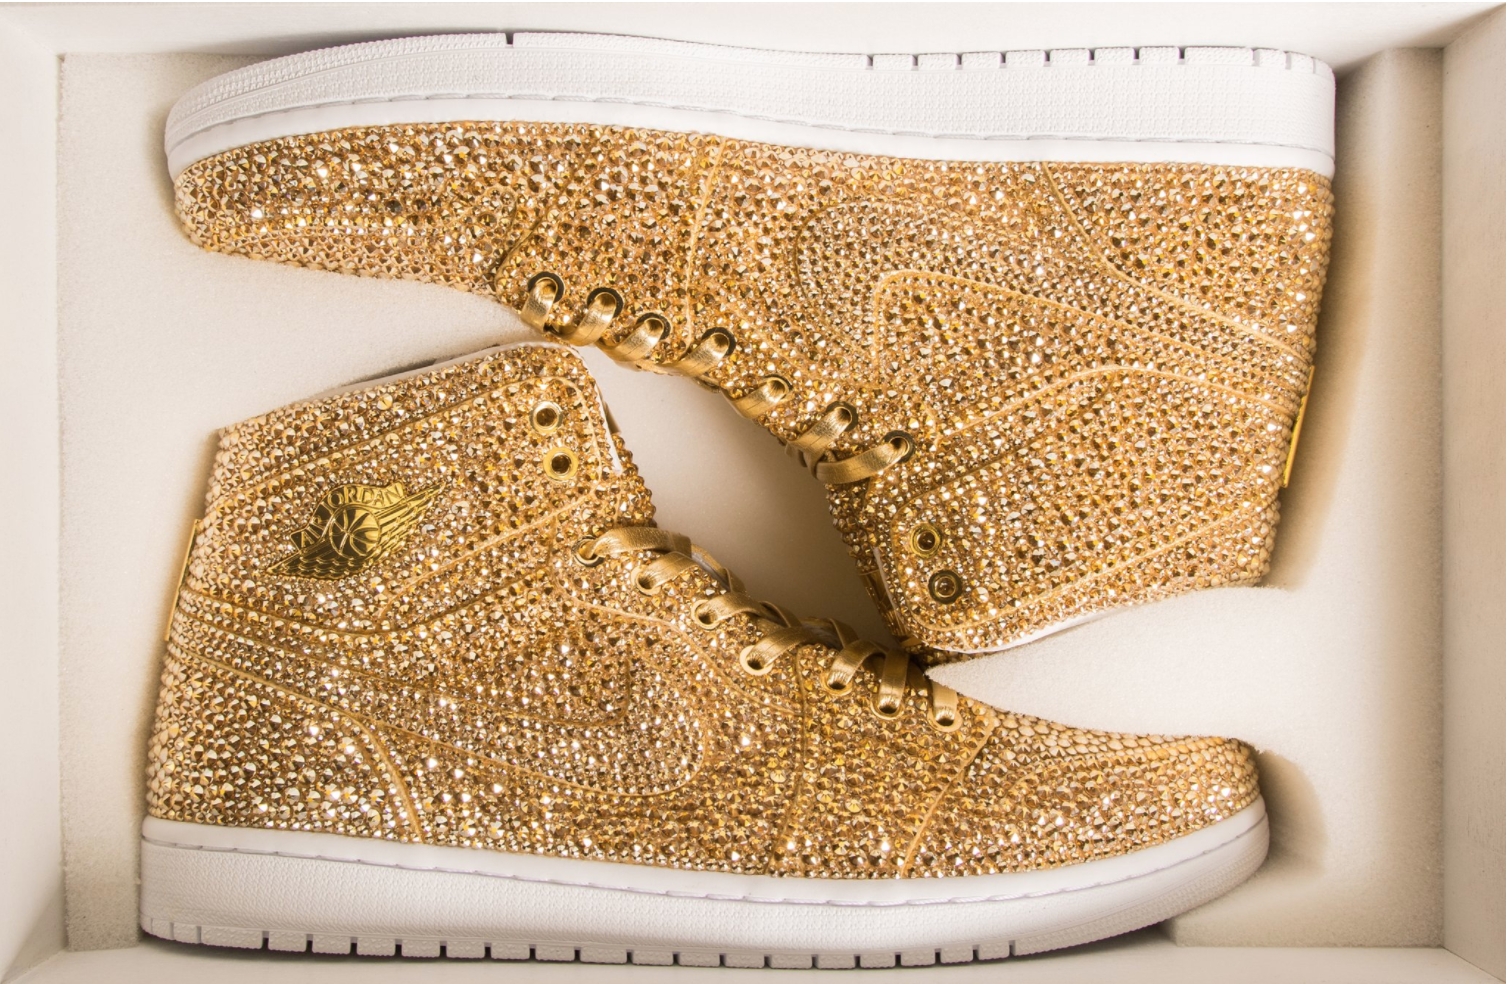 The New Crystal-Bedazzled Air Jordans 